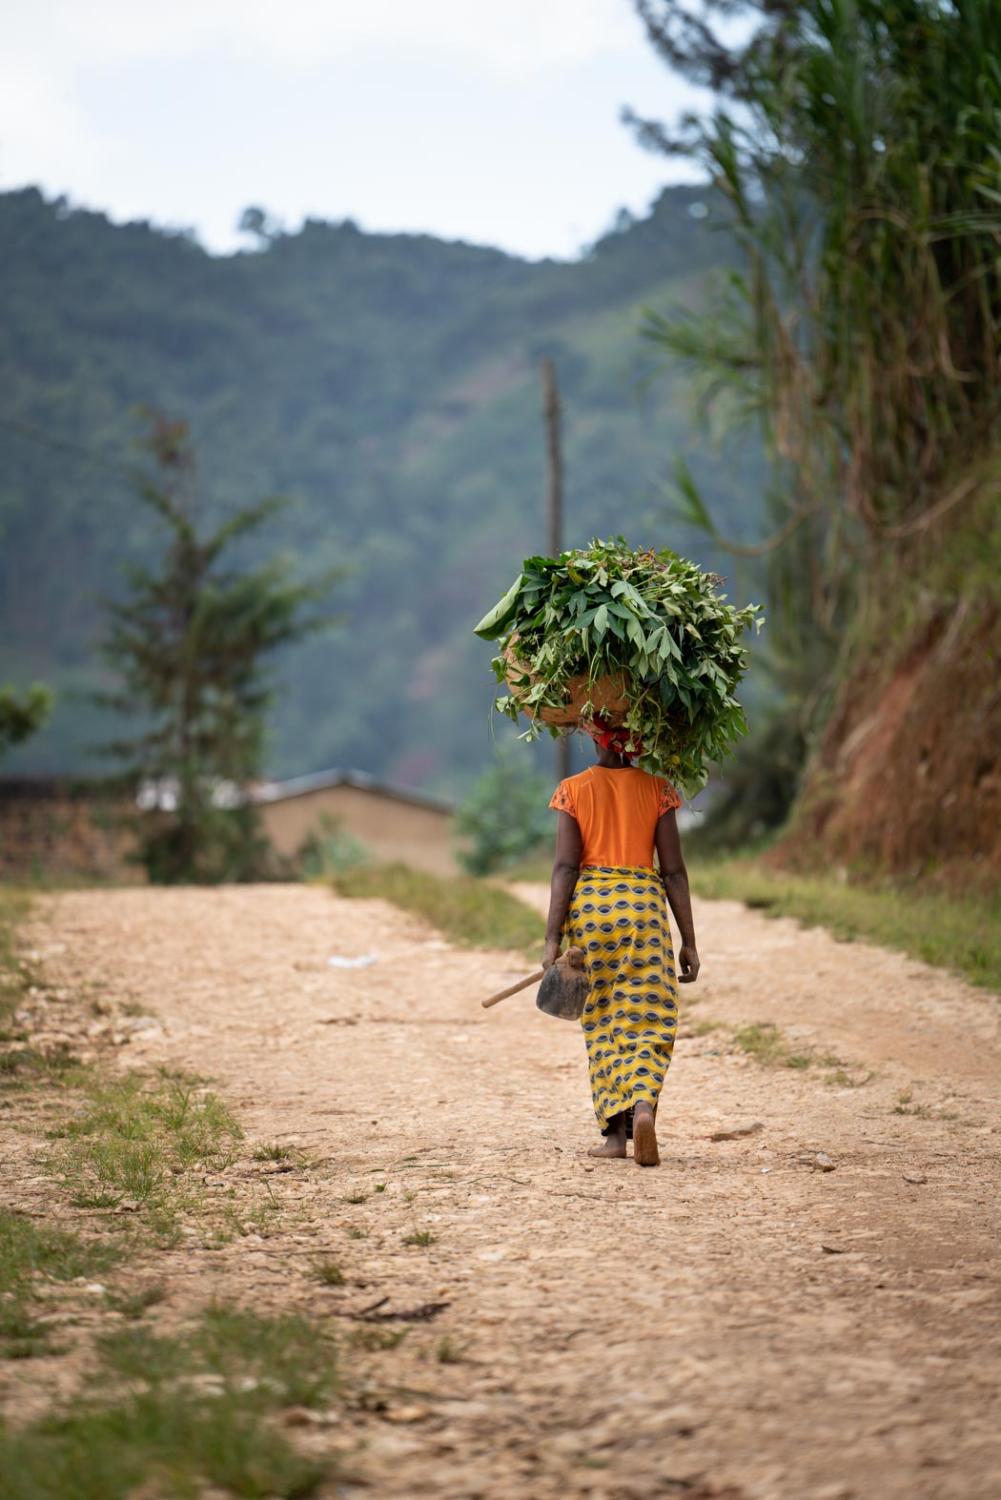 woman with basket on head walking away on dirt road